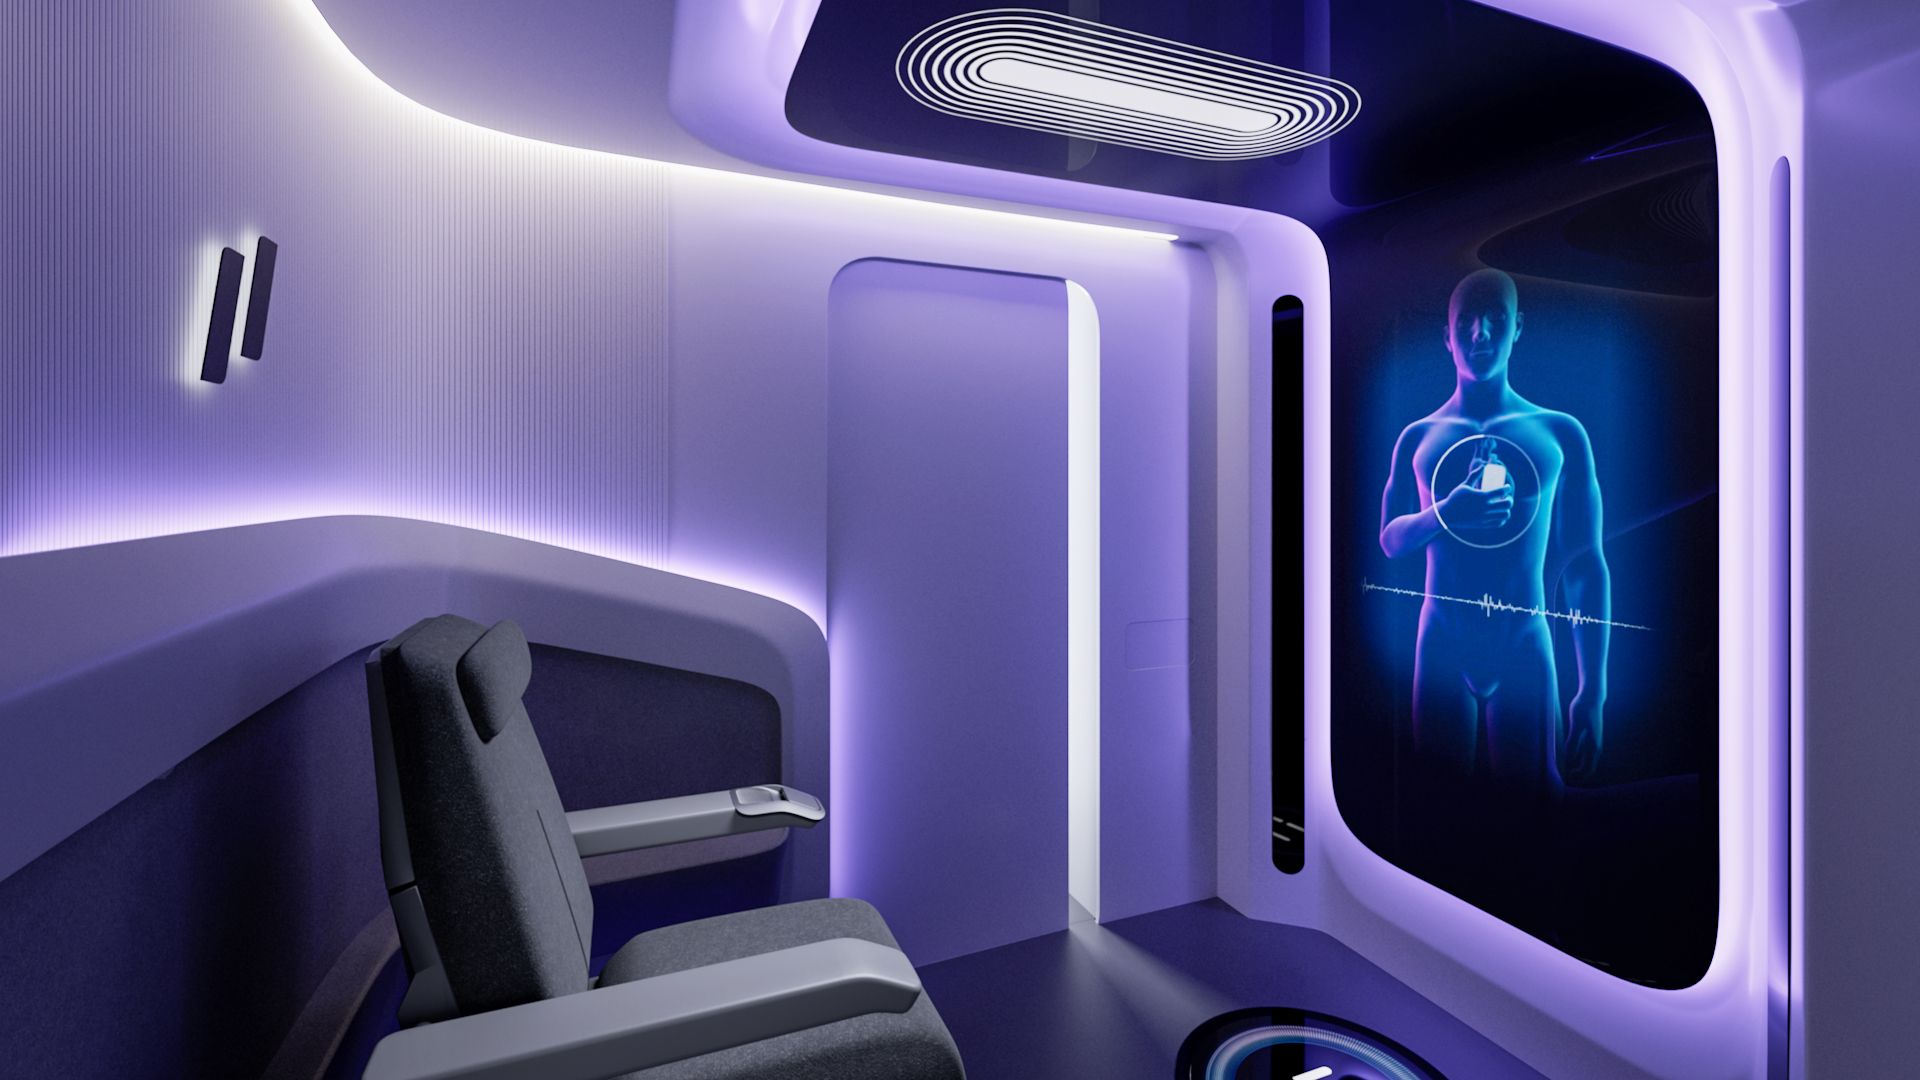 Inside the CarePod, an airplane-like seat faces a screen with an image of a body on it.